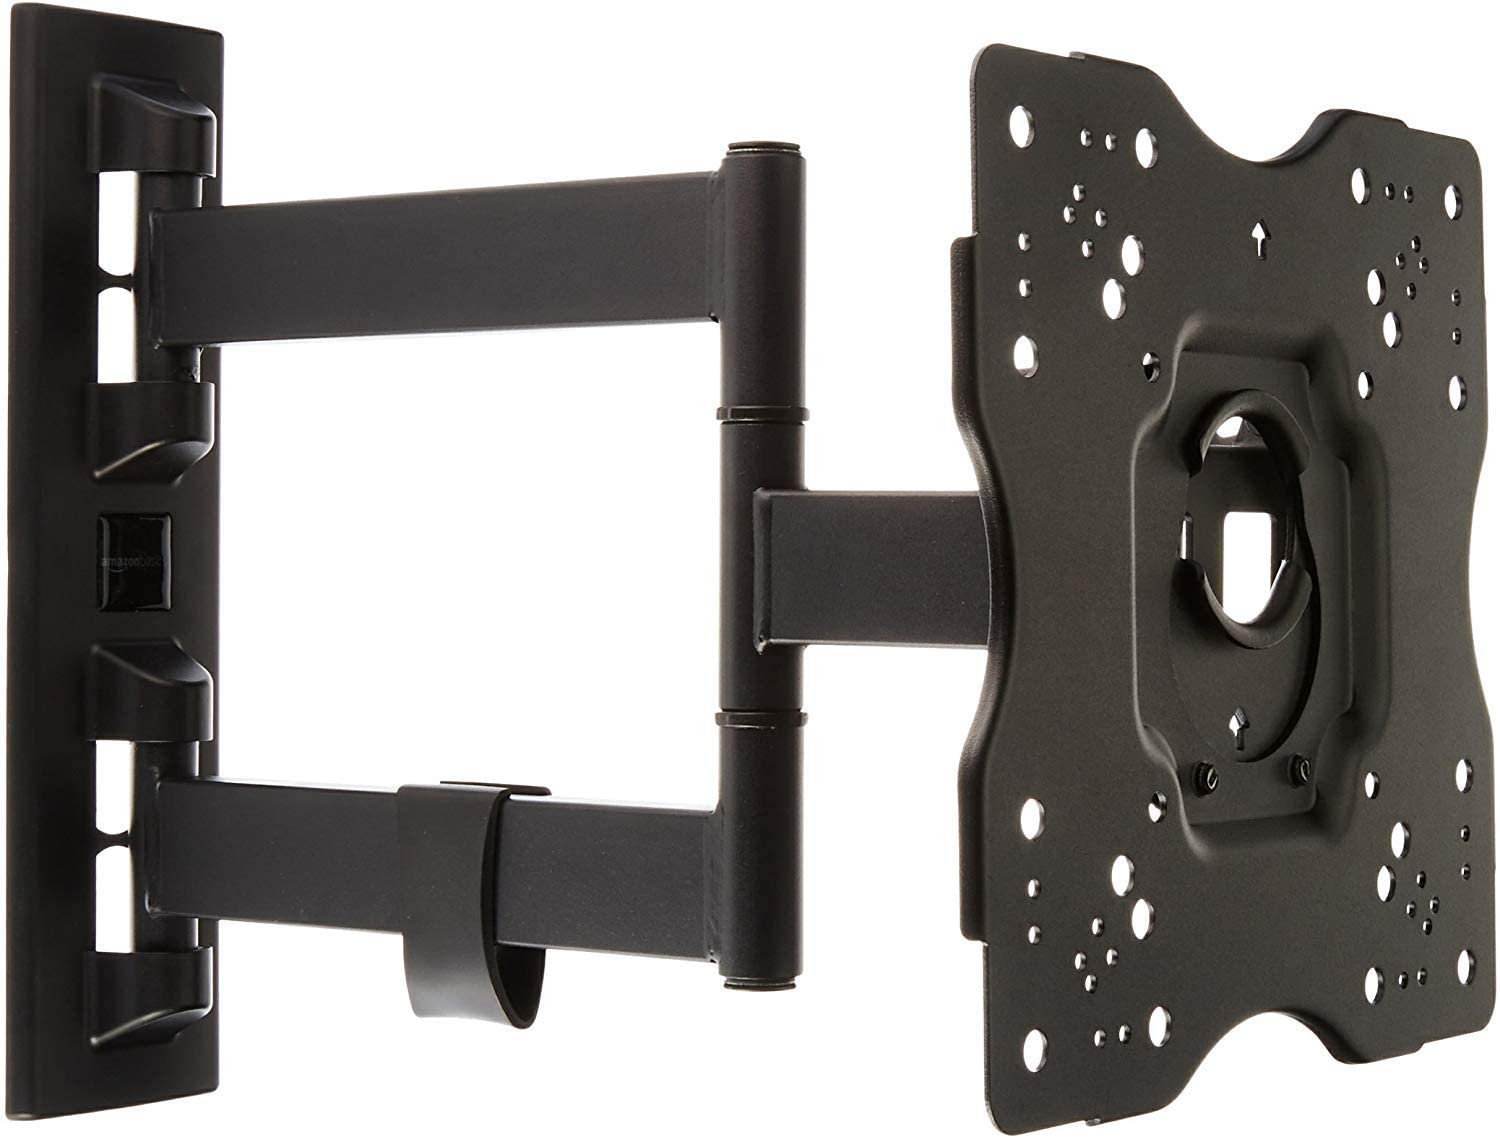 Tv and Fire Wall Awesome Amazonbasics Heavy Duty Full Motion Articulating Tv Wall Mount for 22 Inch to 55 Inch Led Lcd Flat Screen Tvs